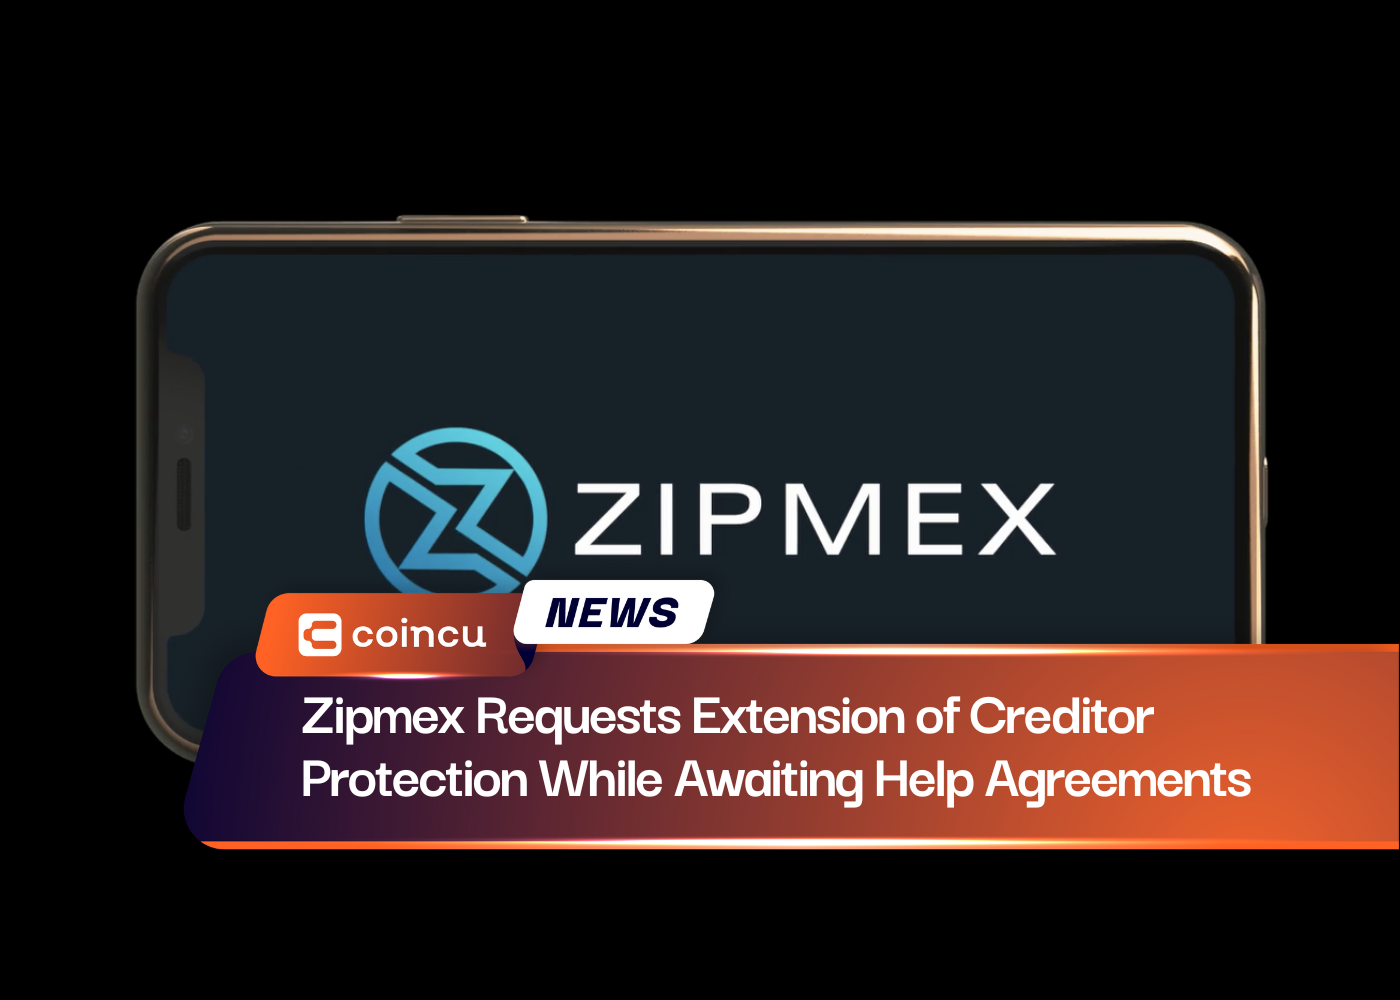 Zipmex Requests Extension Of Creditor Protection While Awaiting Help Agreements